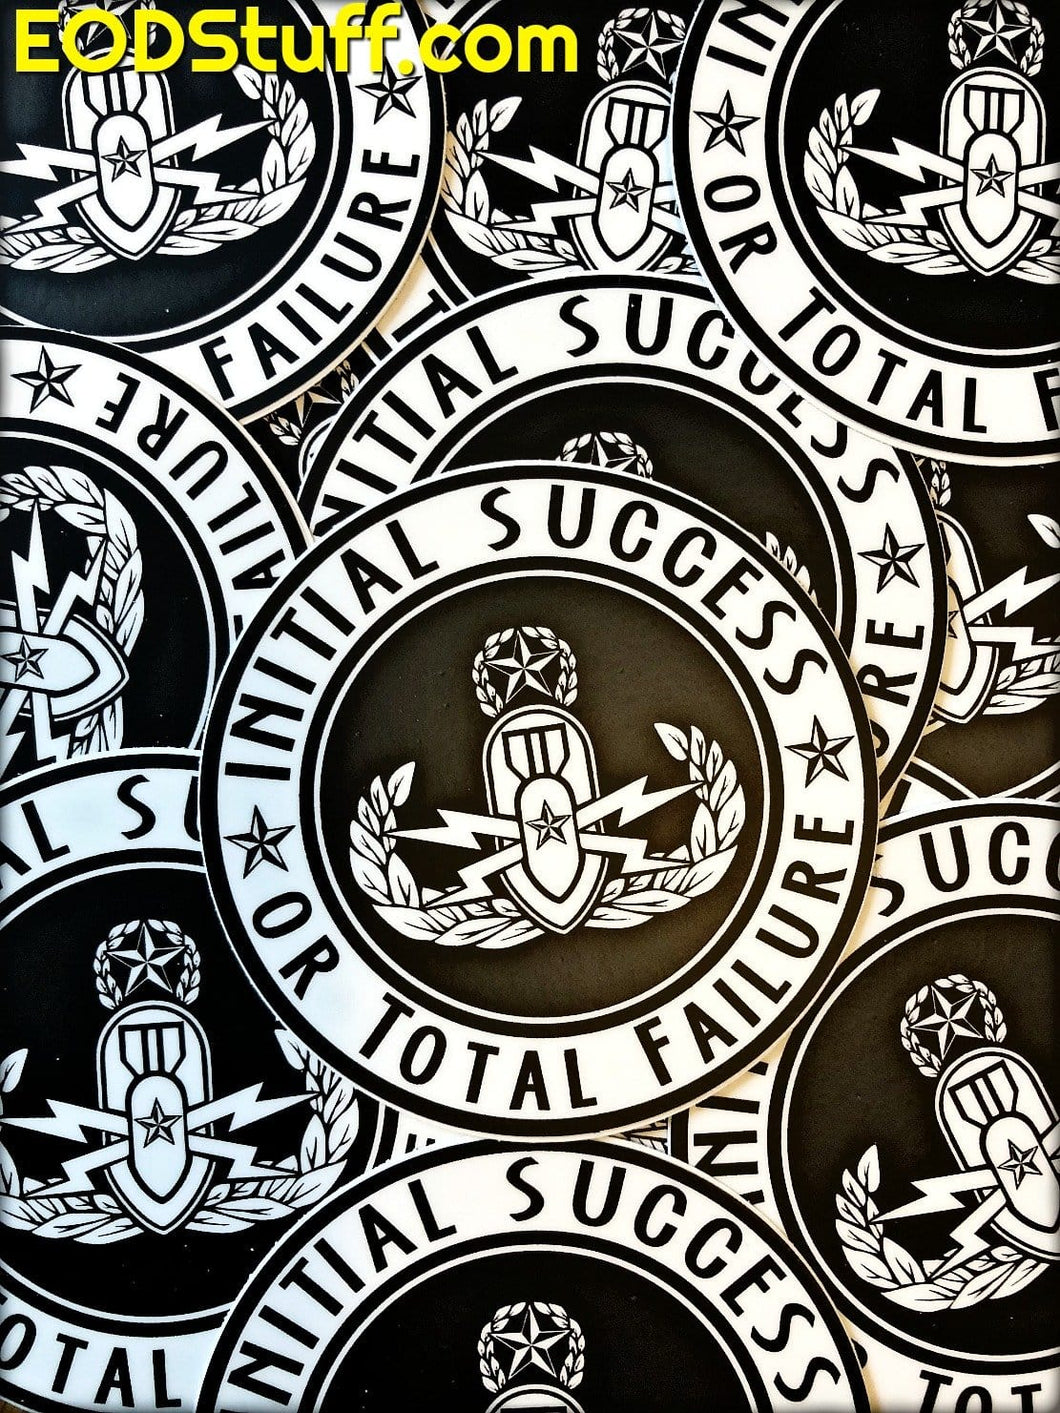 Initial Success or Total Failure Die Cut Stickers - Black and White EOD Sticker